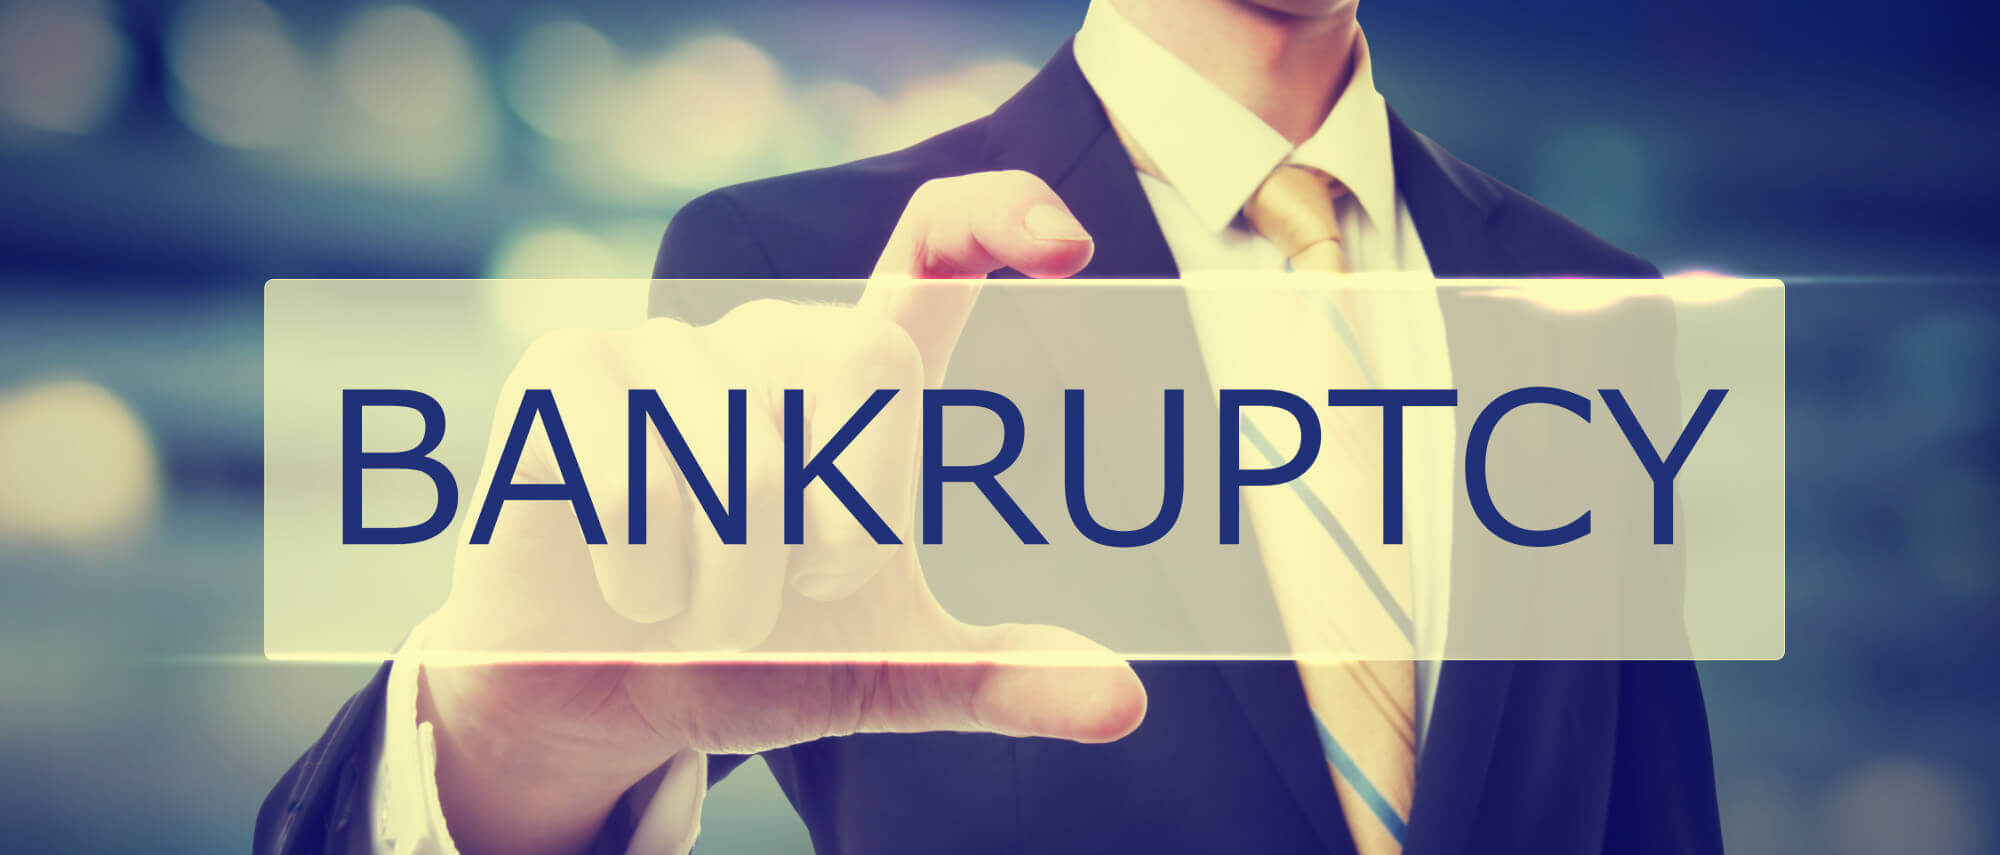 Business man holding Bankruptcy sign